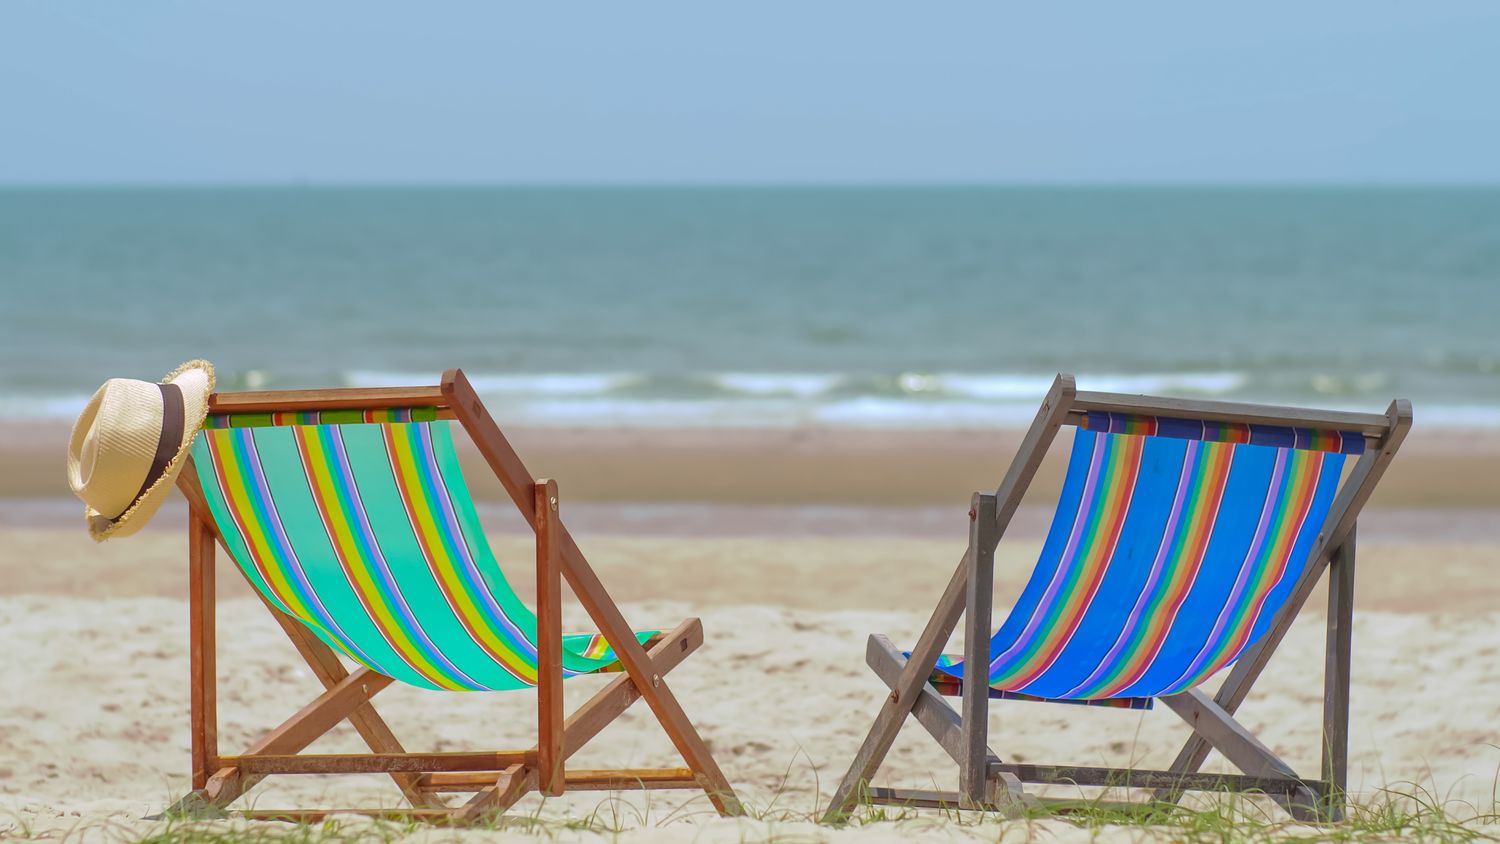 01 – sandrew – colorful-beach-chairs-with-hat-on-the-beach-and-se-2023-11-27-05-28-25-utc